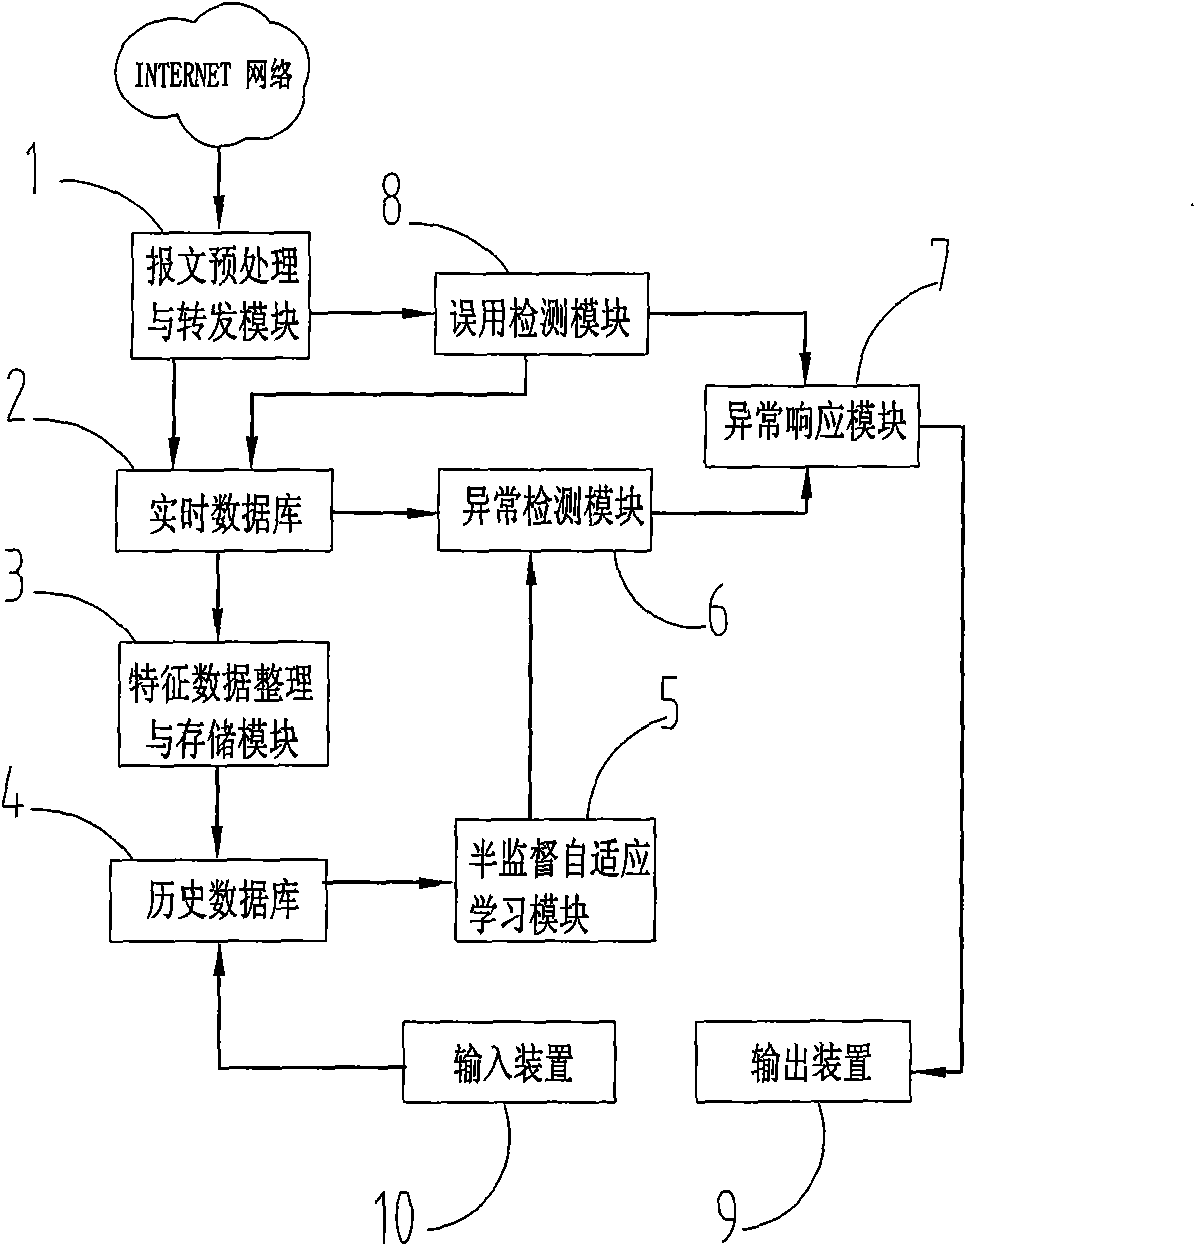 Self-adapting network intrusion detection system